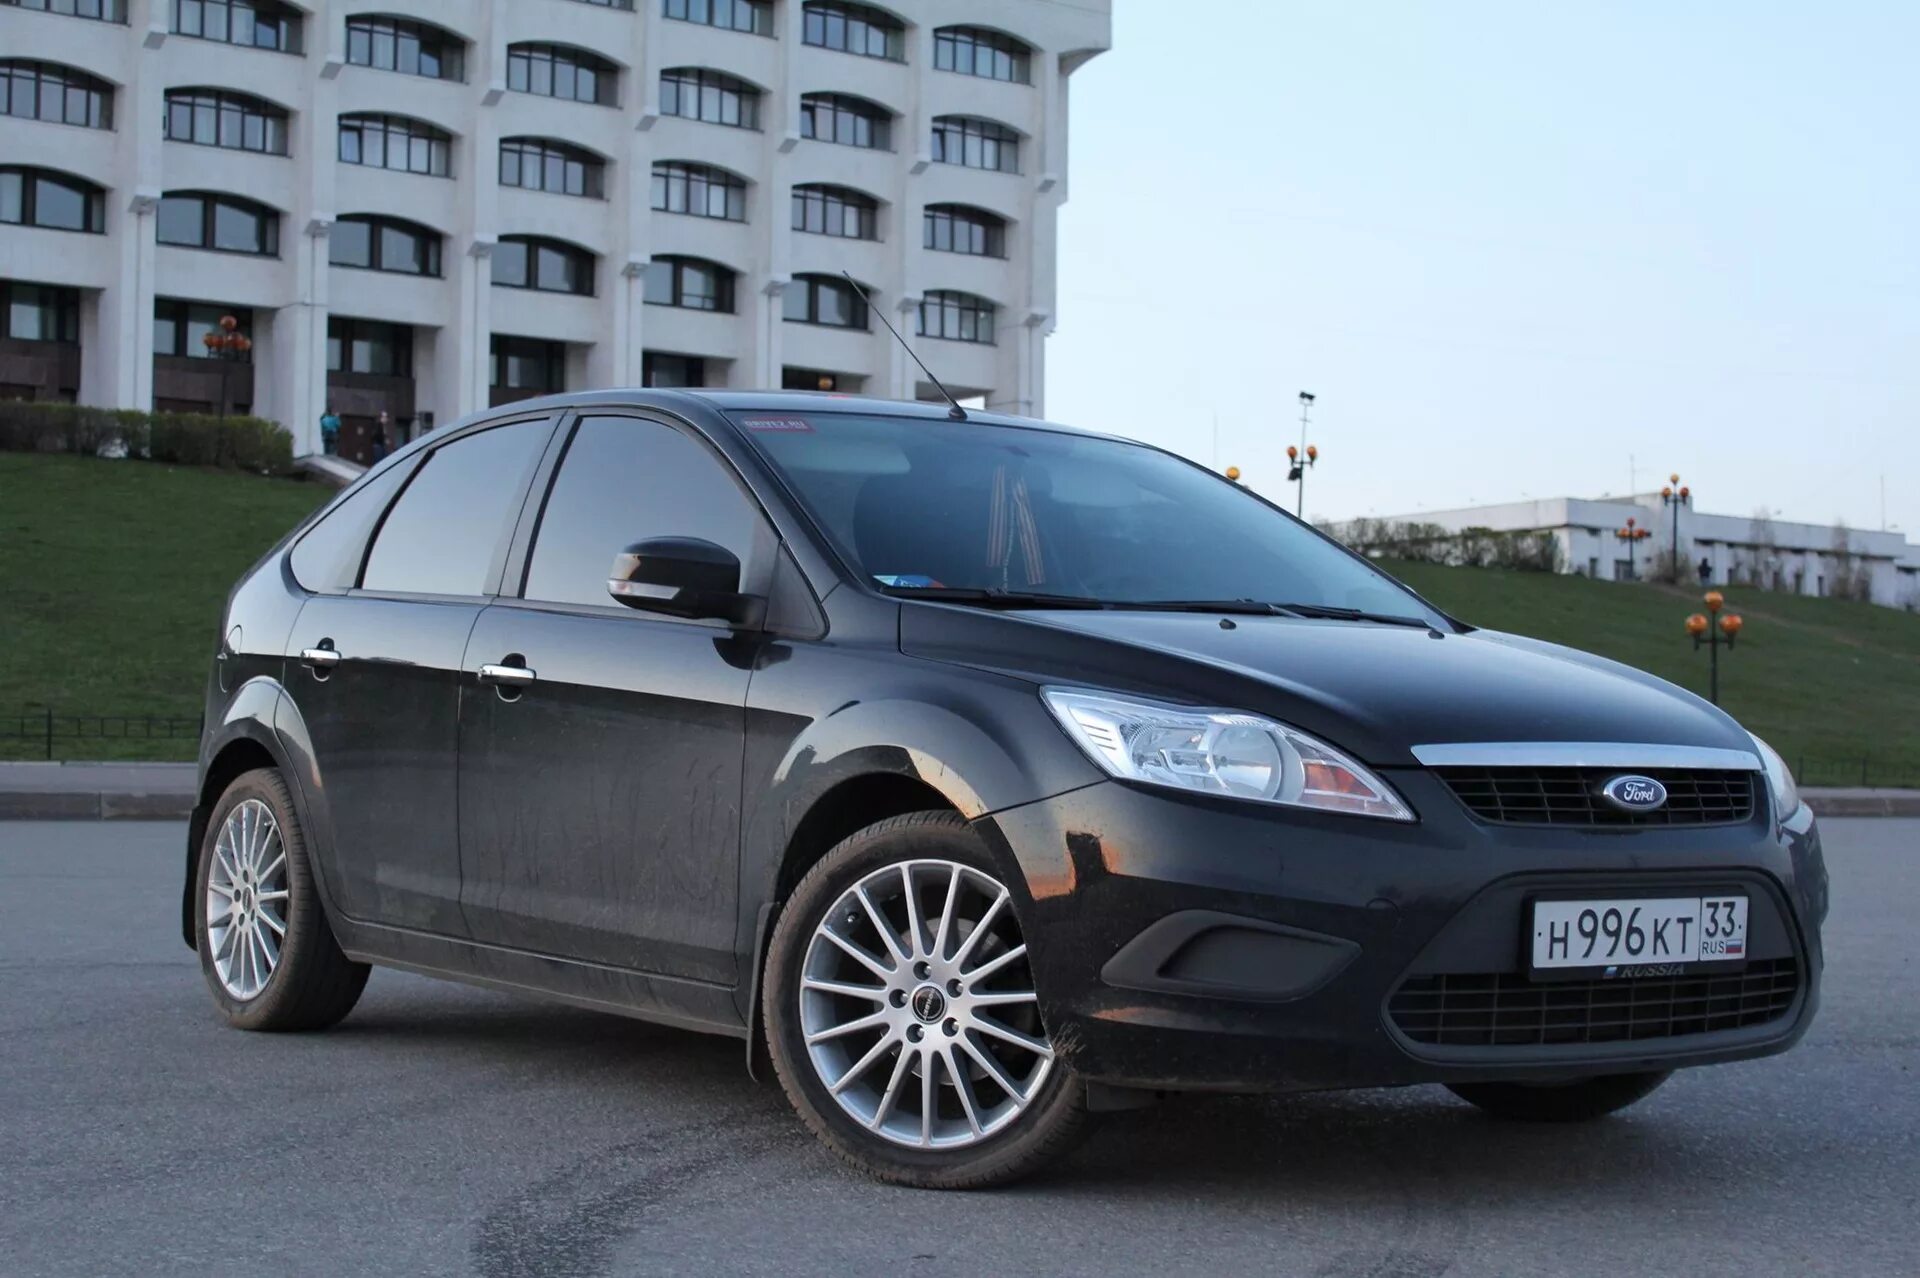 Ford Focus 2009 Hatchback. Форд фокус 2009 хэтчбек. Ford Focus 2 2009. Ford Focus 2 2009 хэтчбек.